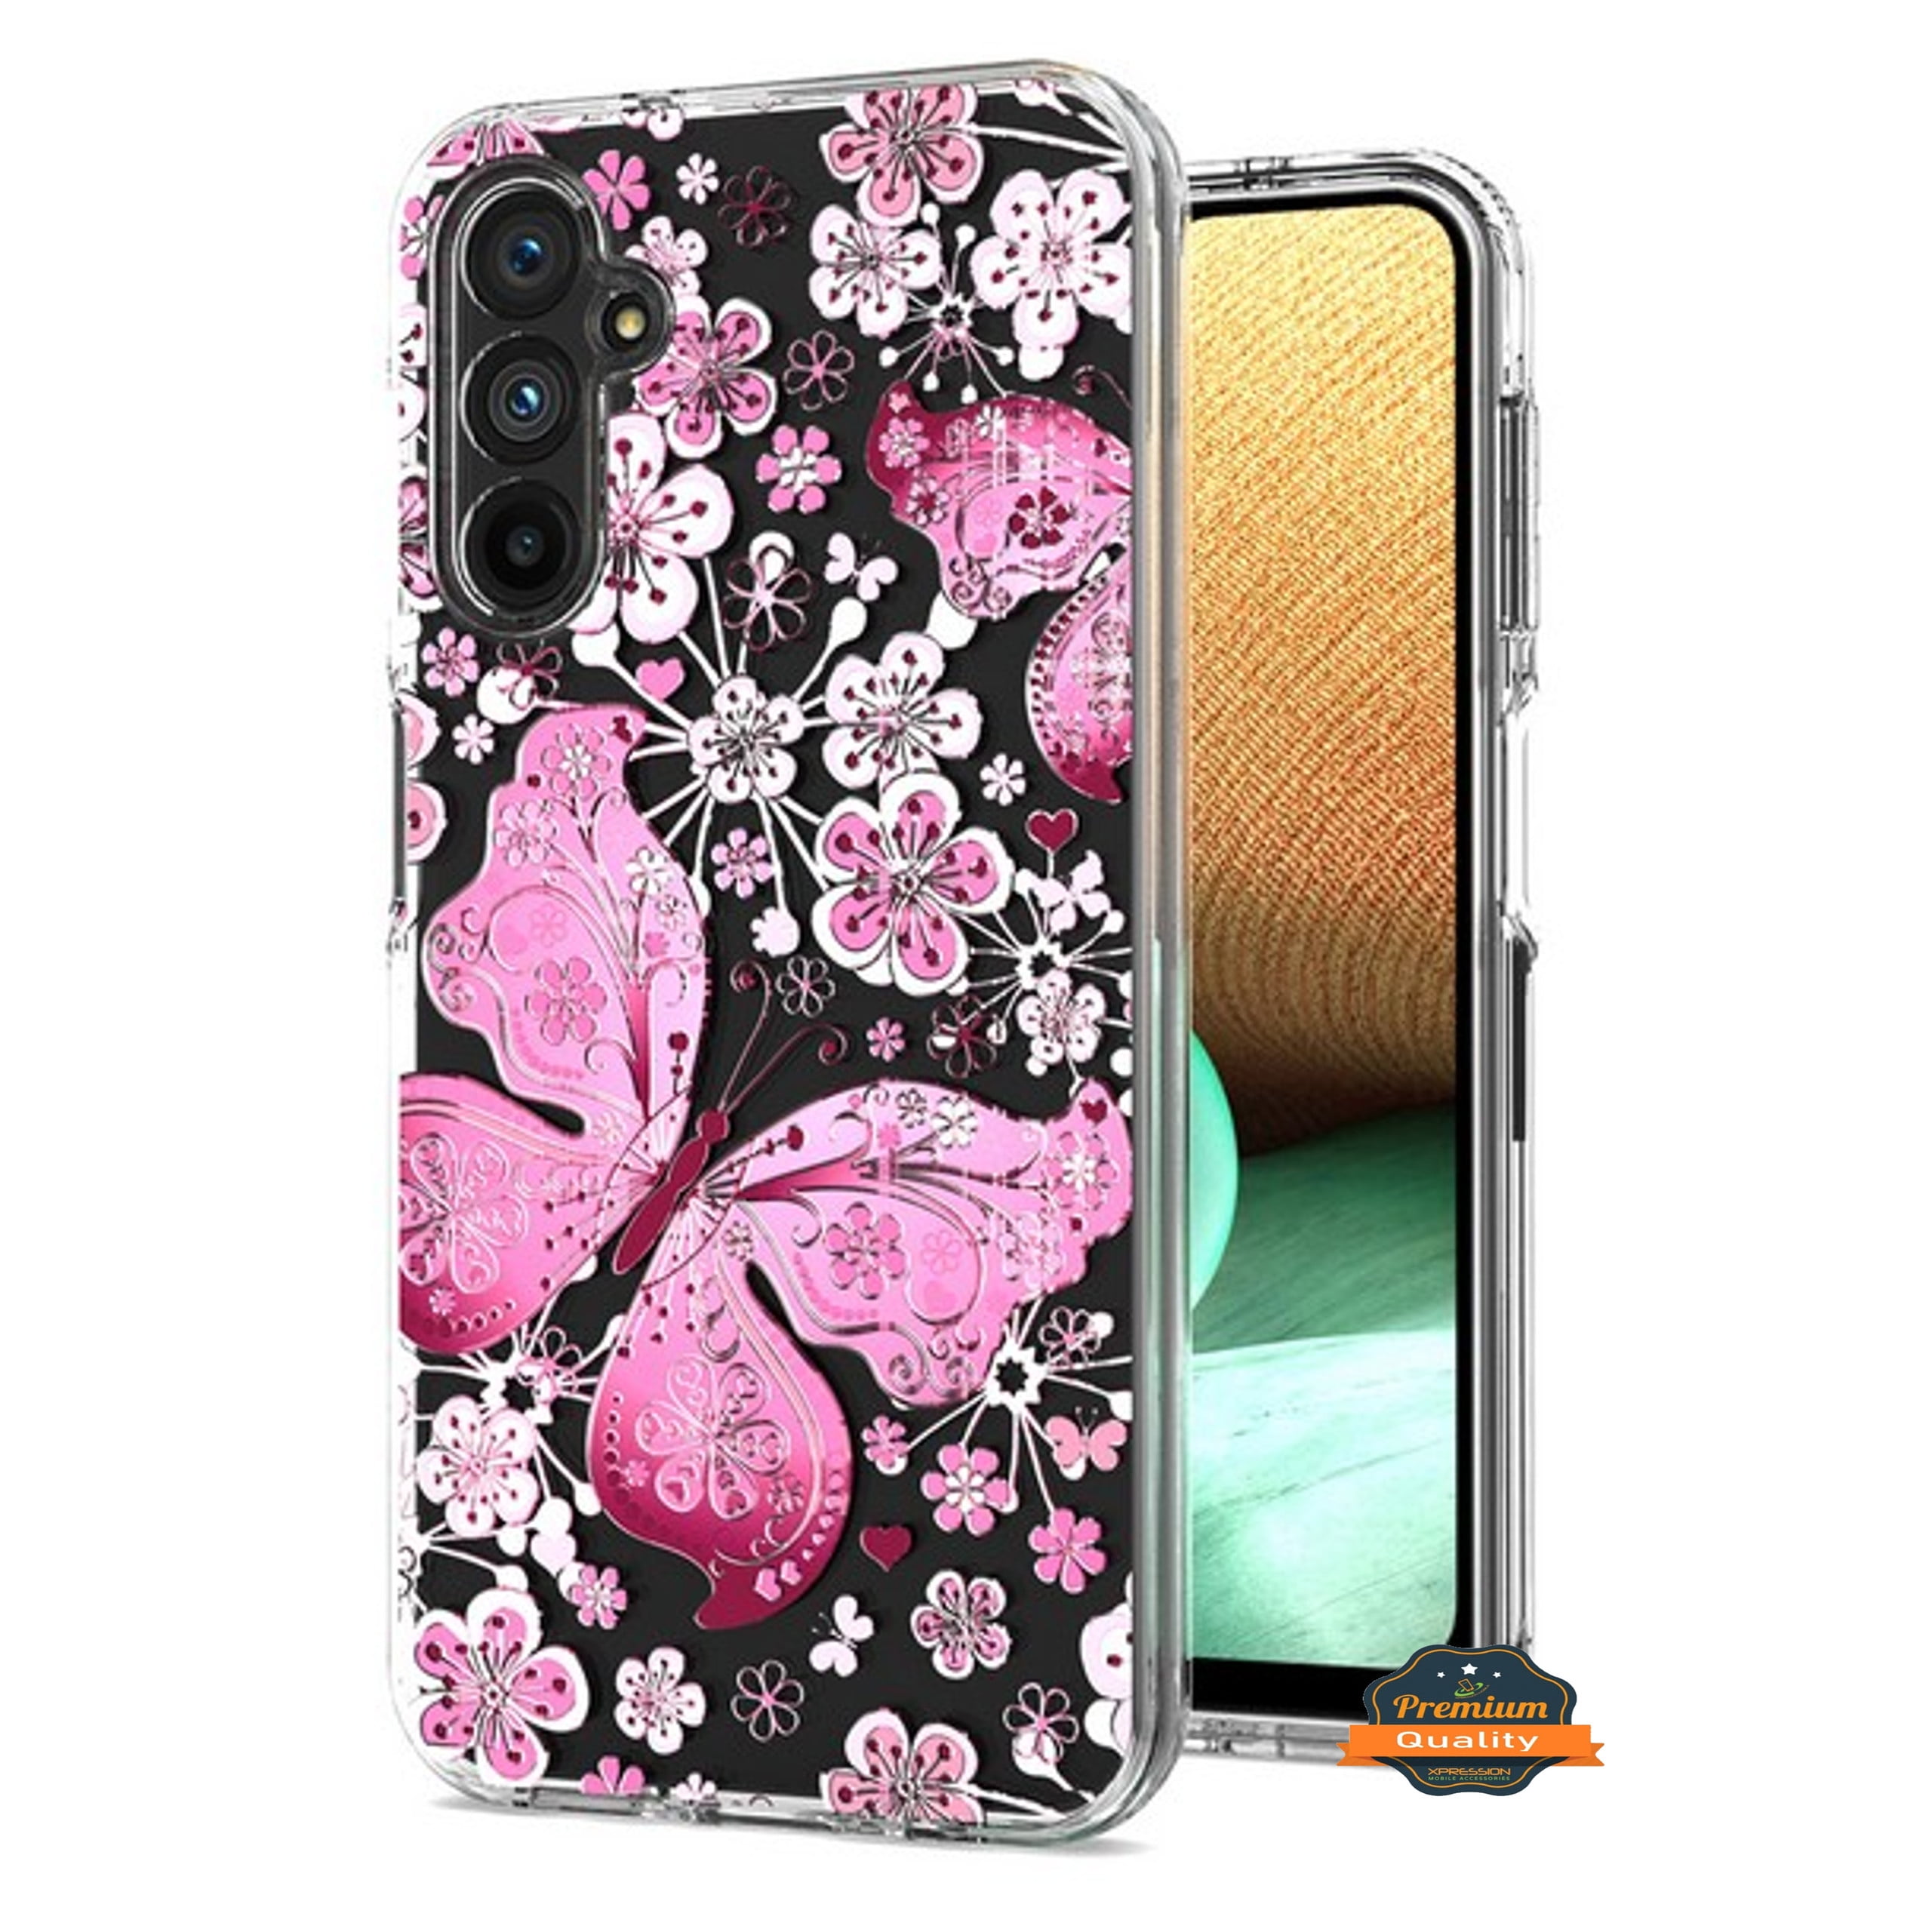 trolley bus Værdiløs lol For Samsung Galaxy A14 5G Hybrid Trendy Image Patterns Design Transparent  Hard Back Shockproof TPU Rubber Phone Case Cover by Xpression - Pink  Butterfly - Walmart.com